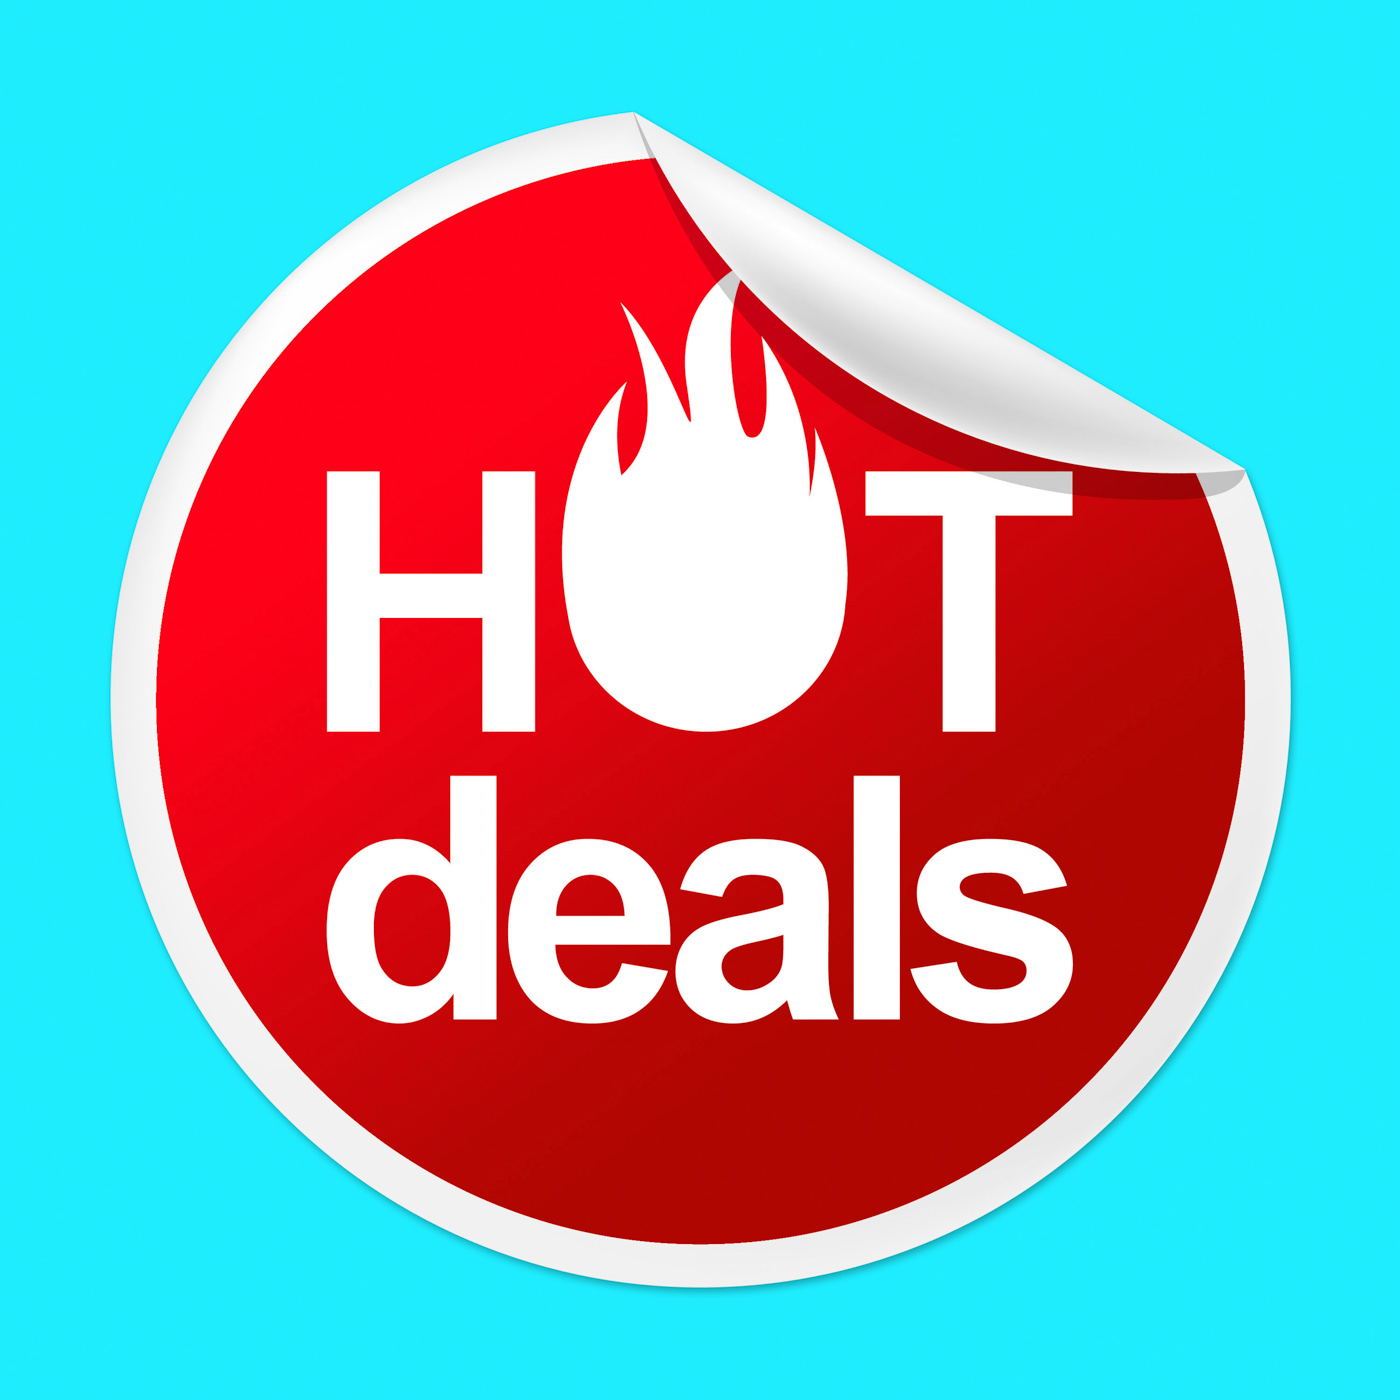 Hot deals sticker indicates number one and best photo